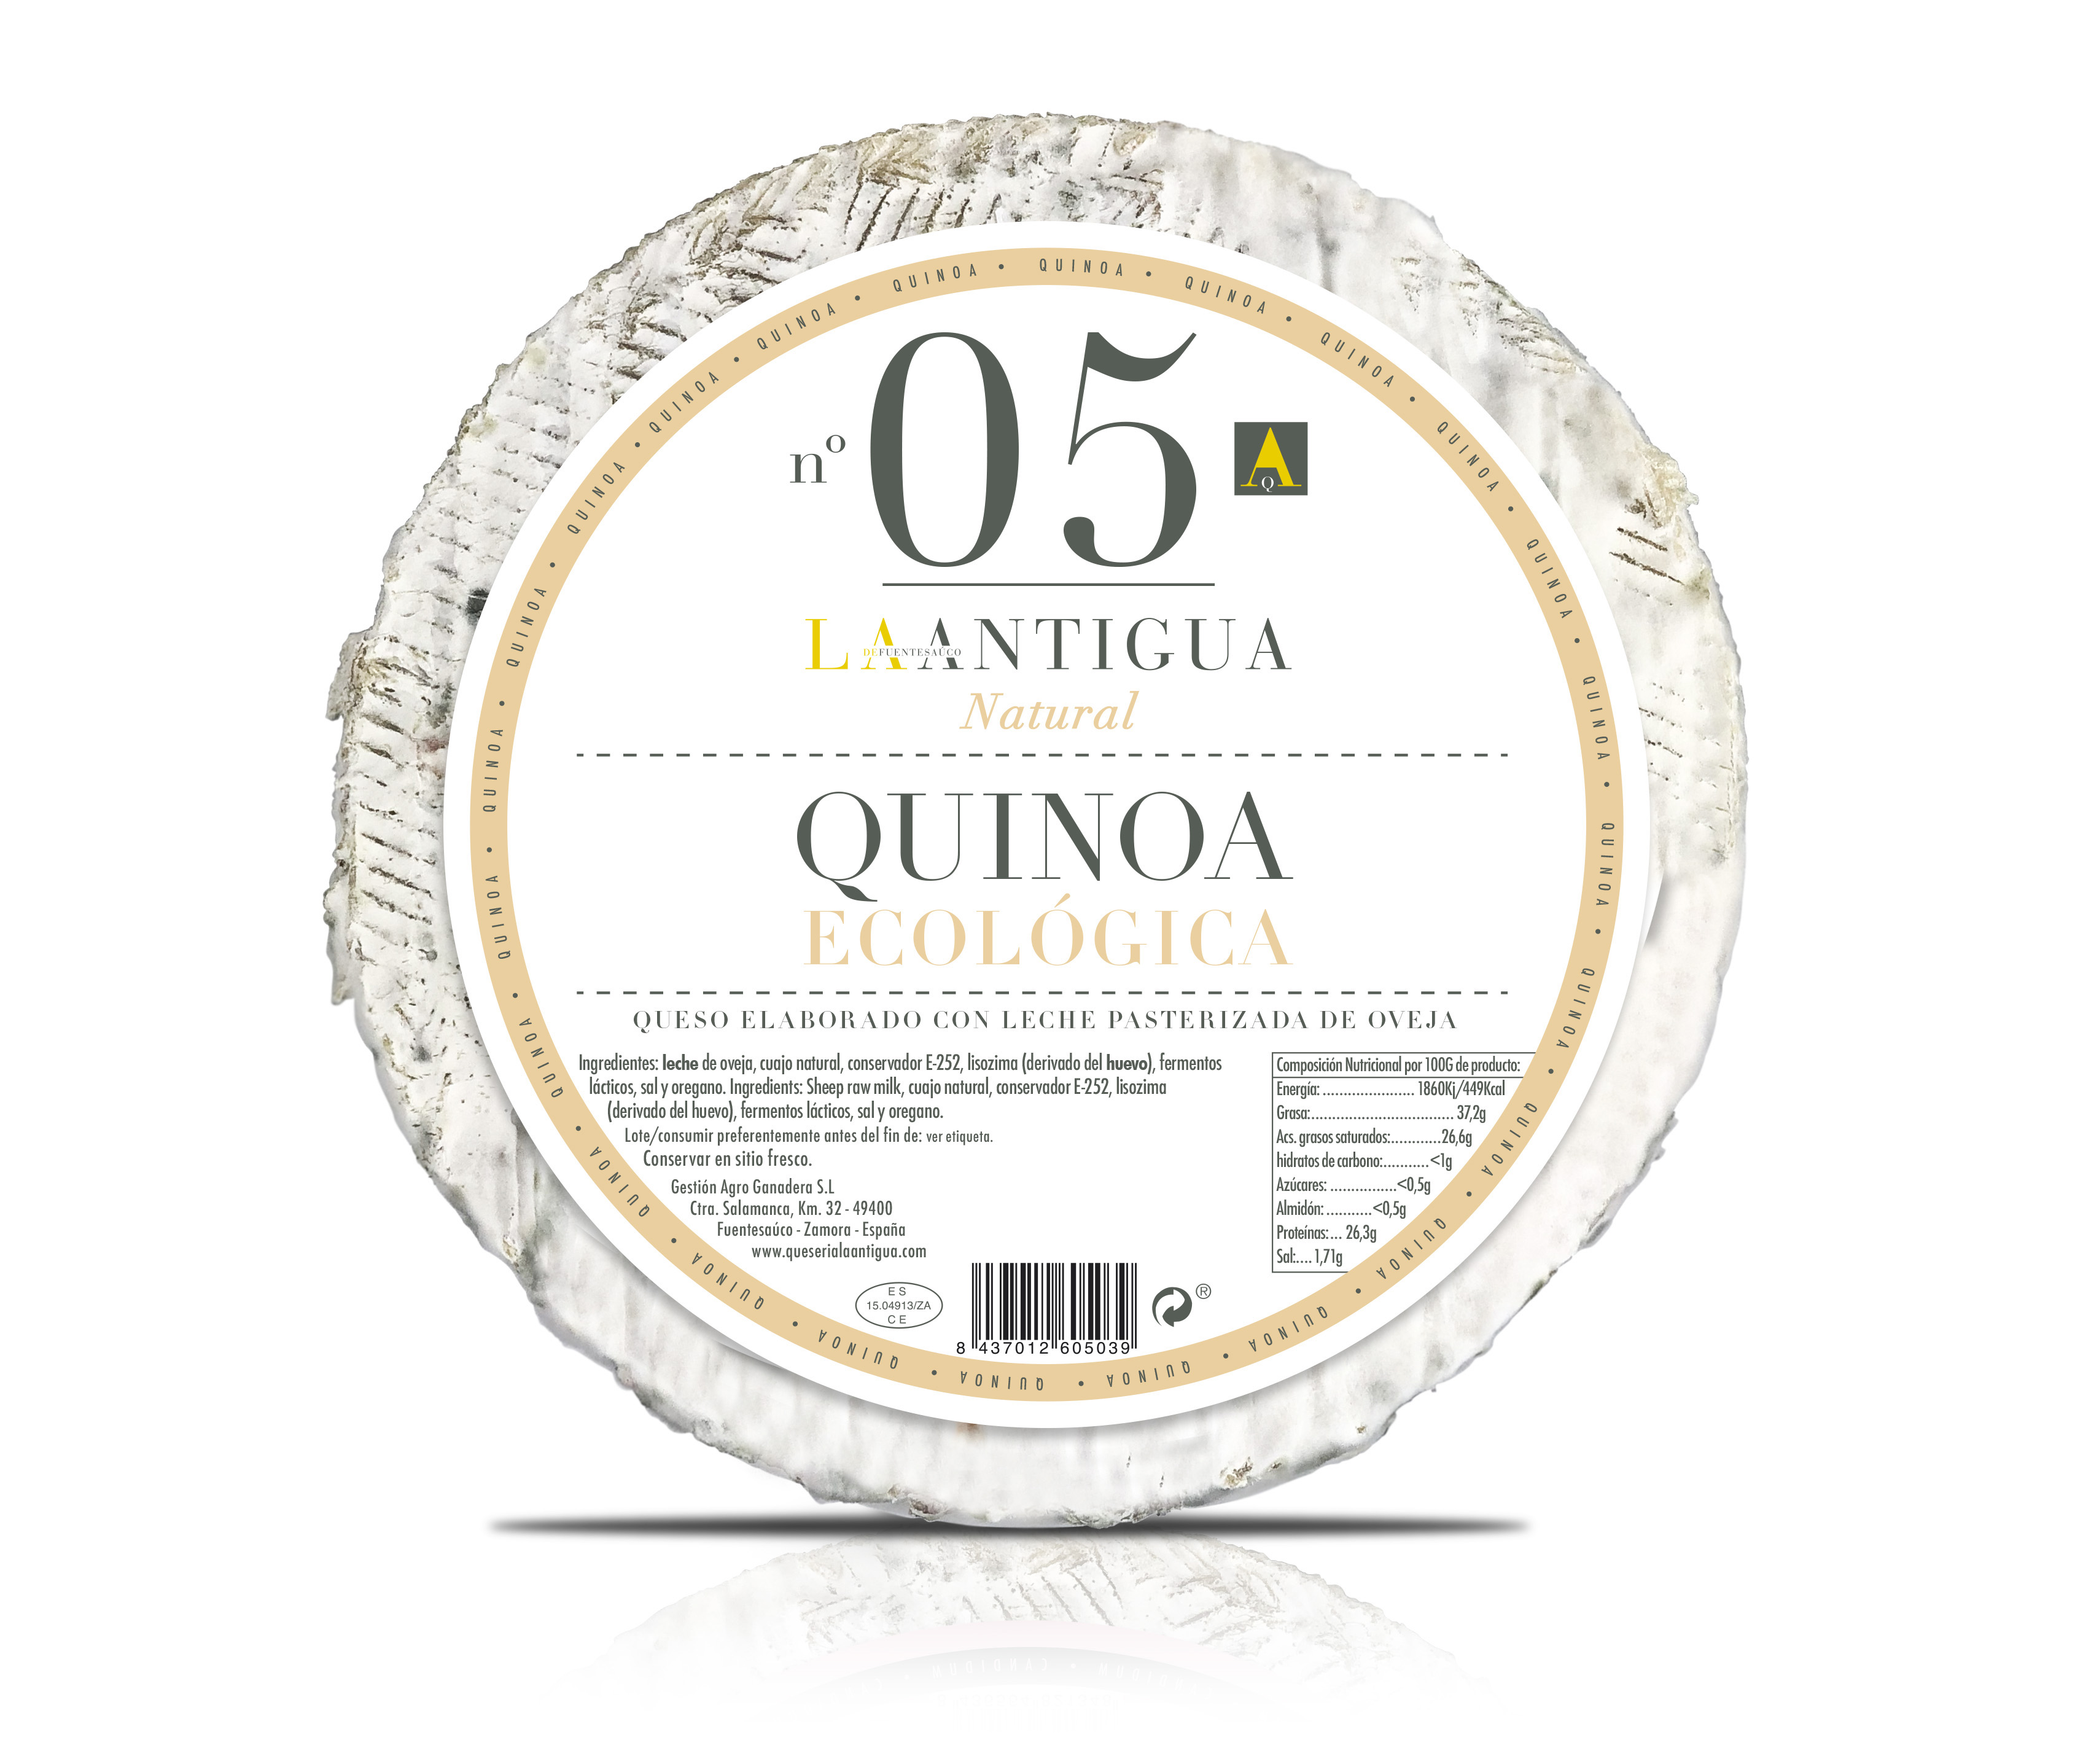 Chia and Quinoa in our cheeses? Natural Line